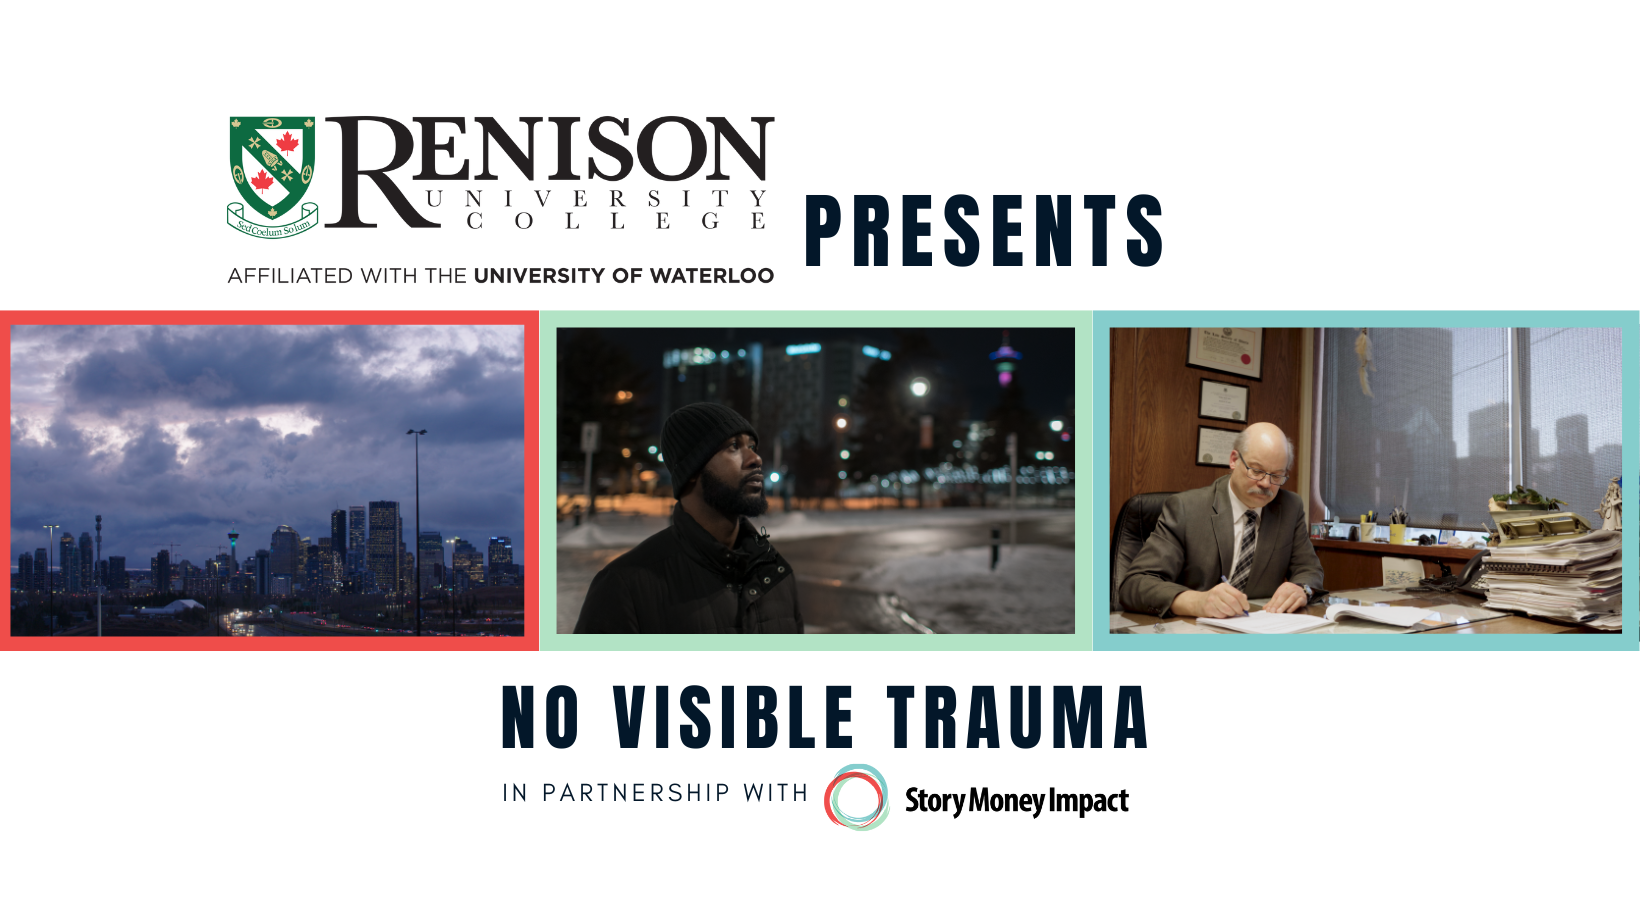 Renison logo. Three images in a row, stills from the film. 